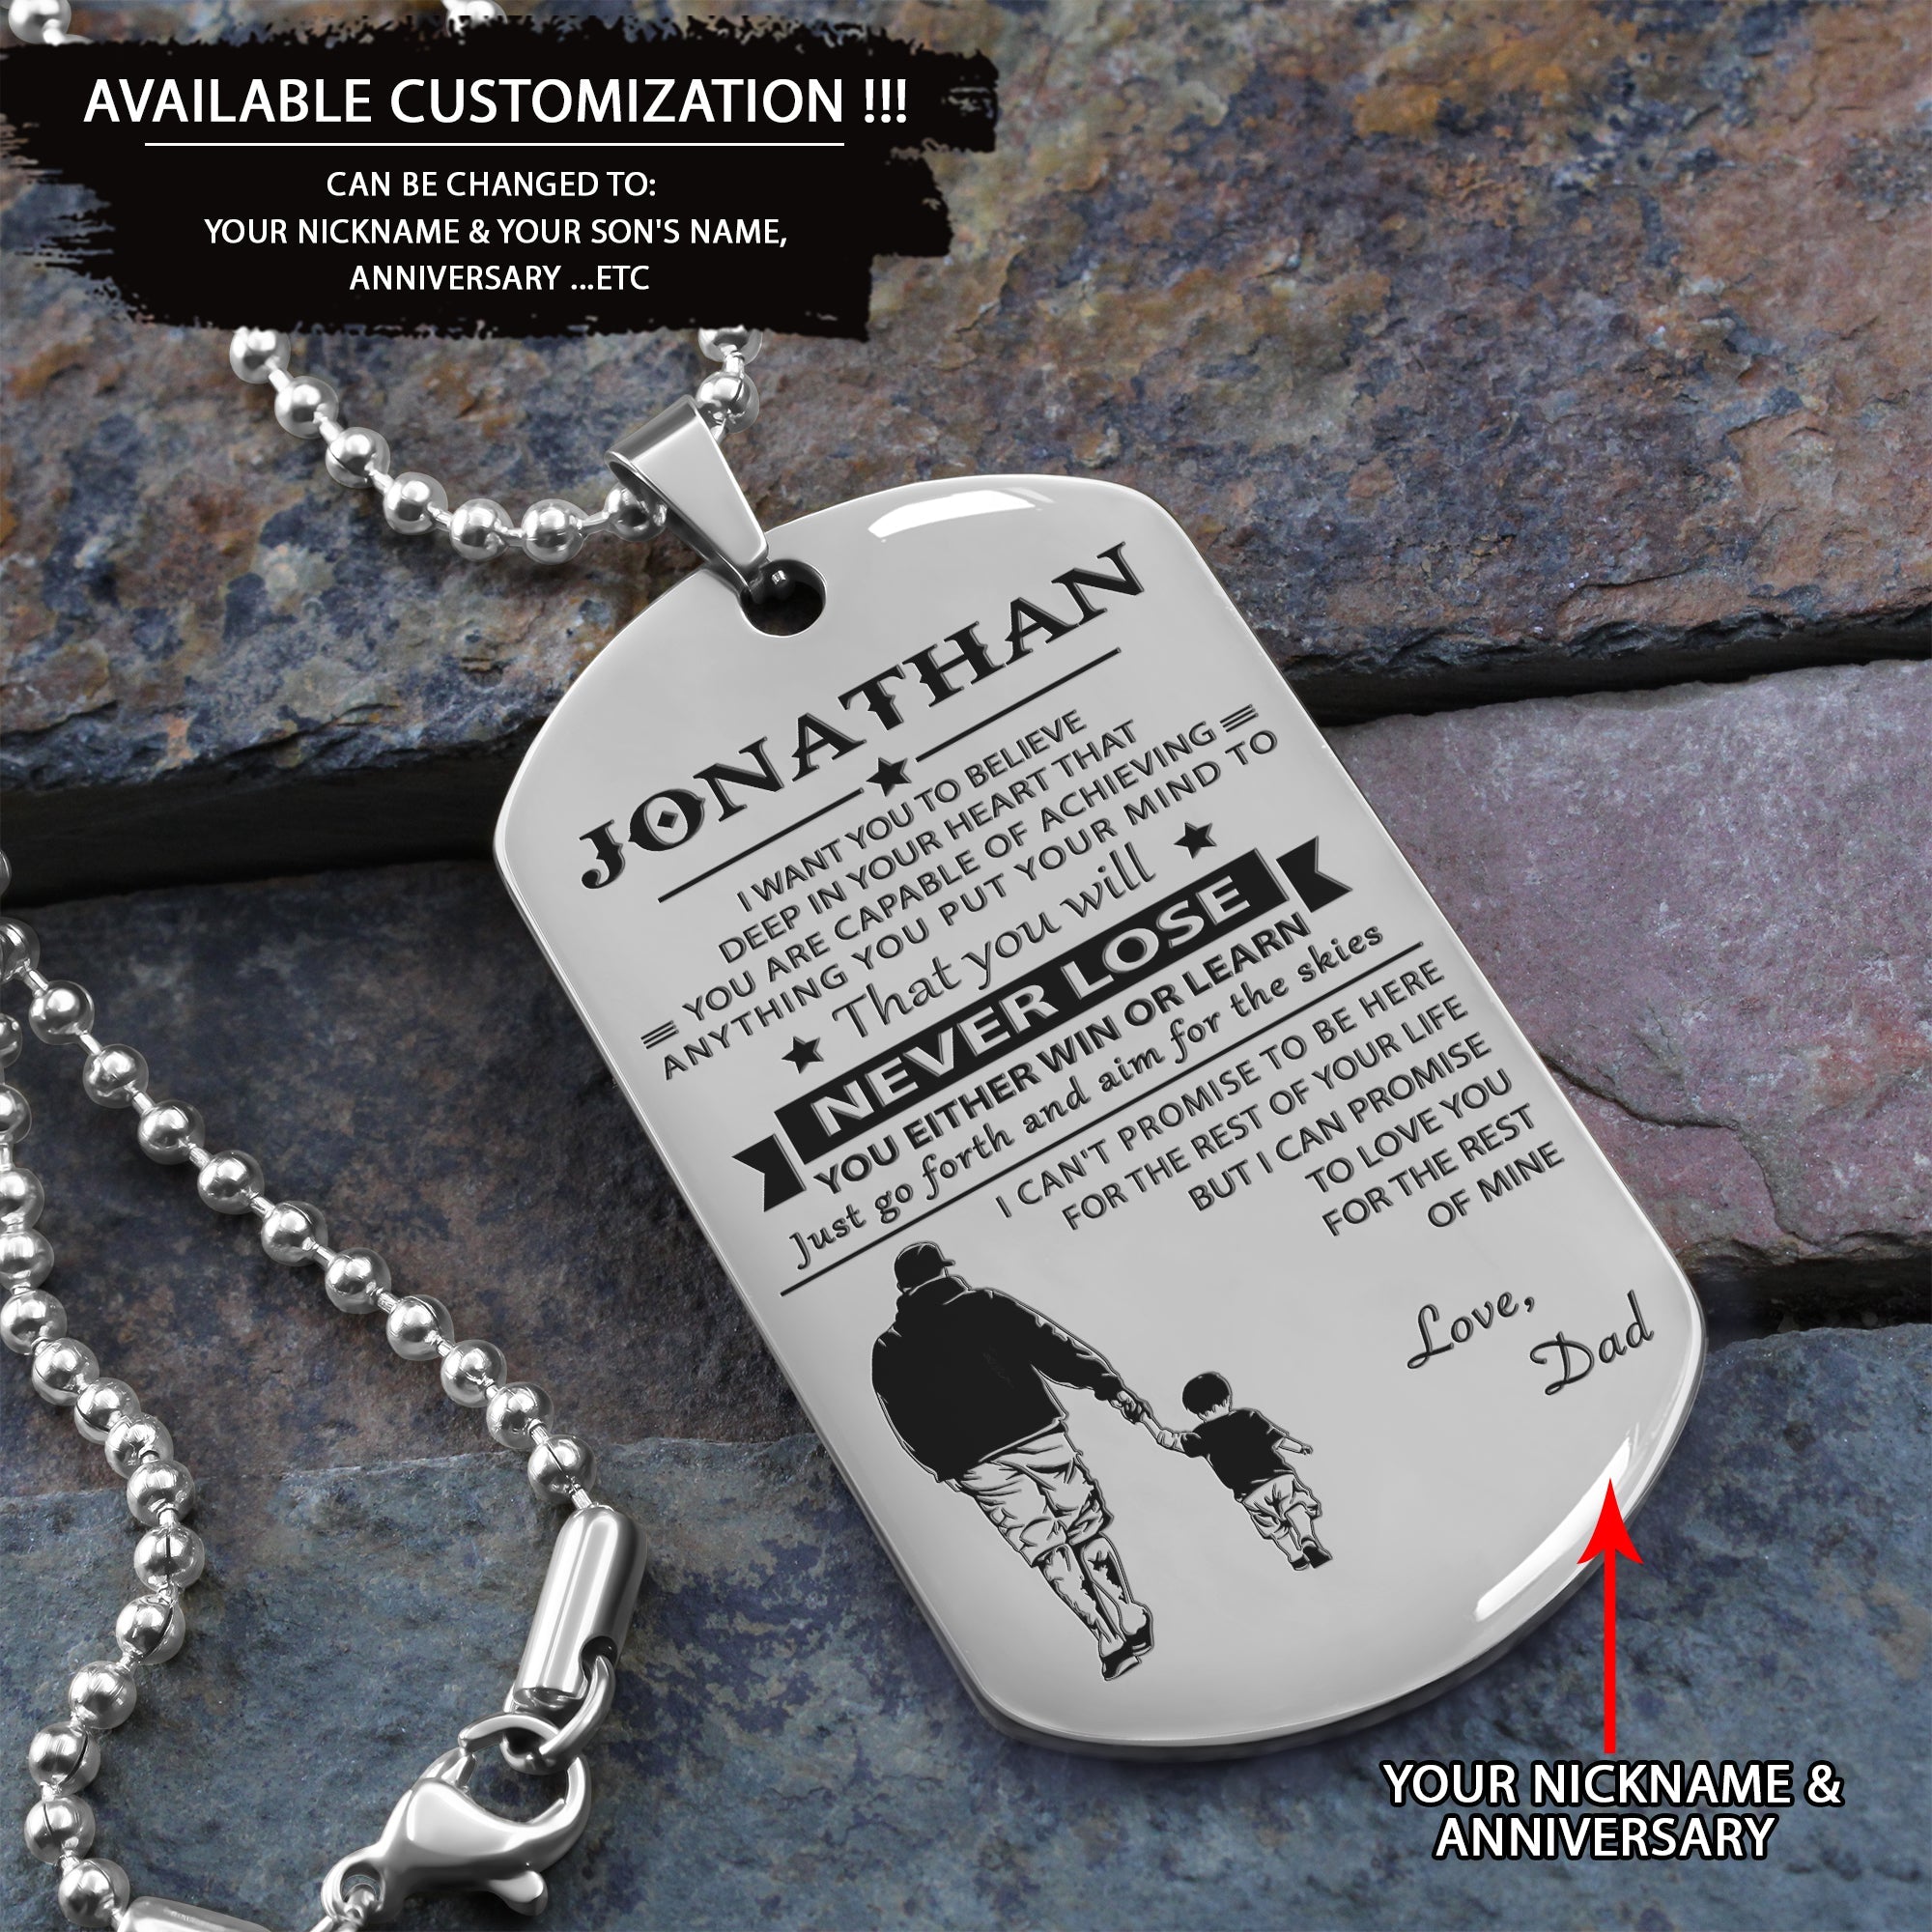 Customizable engraved black dog tag dad to son never lose